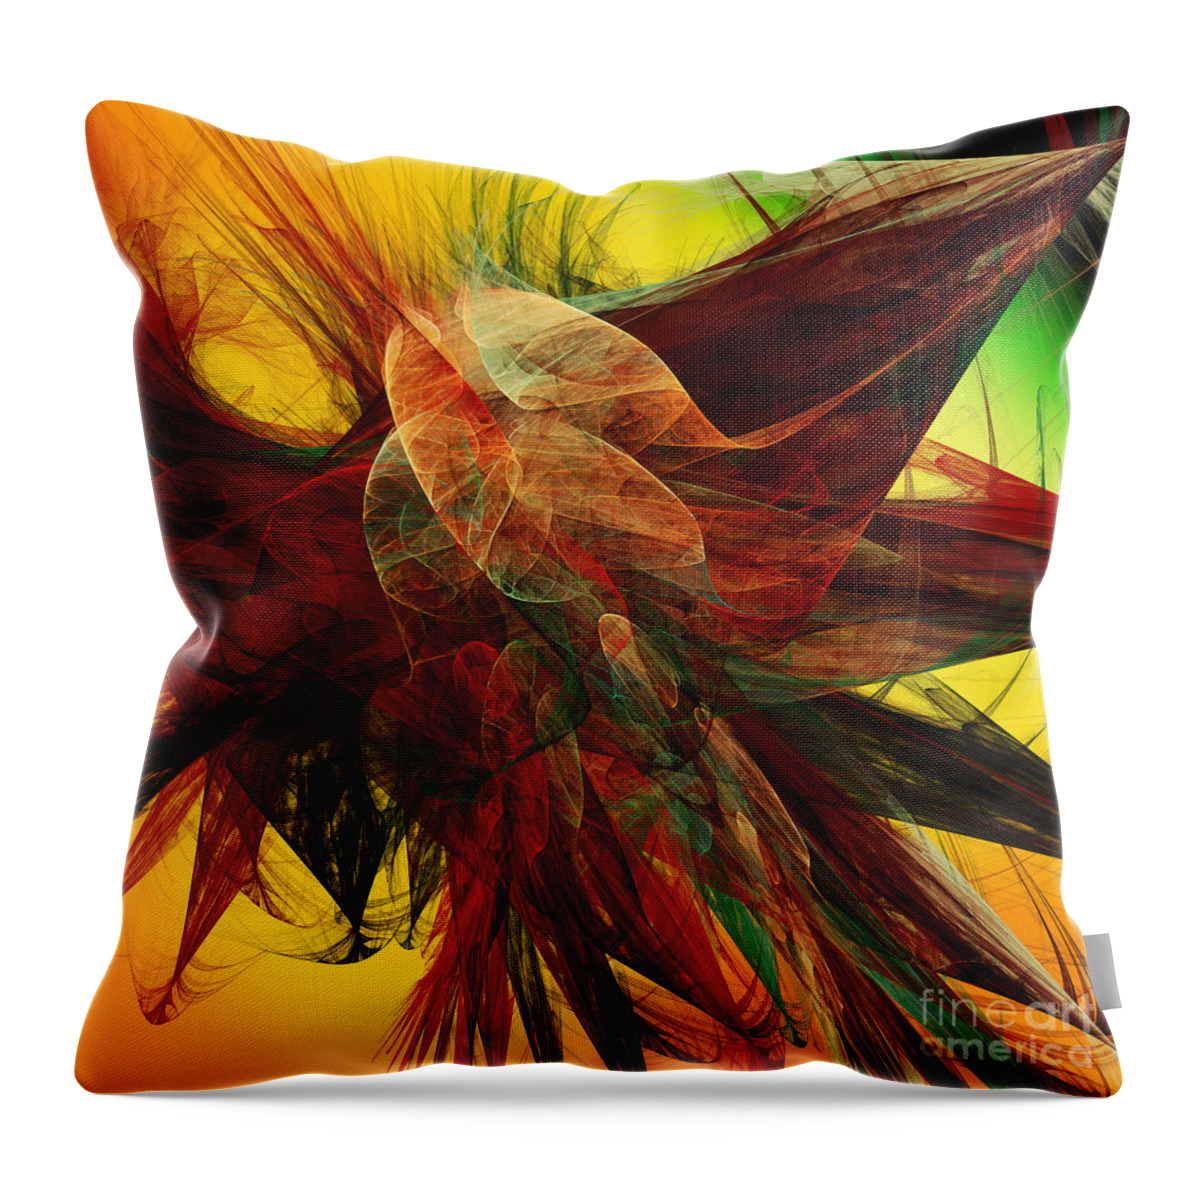 Andee Design Abstract Throw Pillow featuring the digital art Autumn Wings by Andee Design